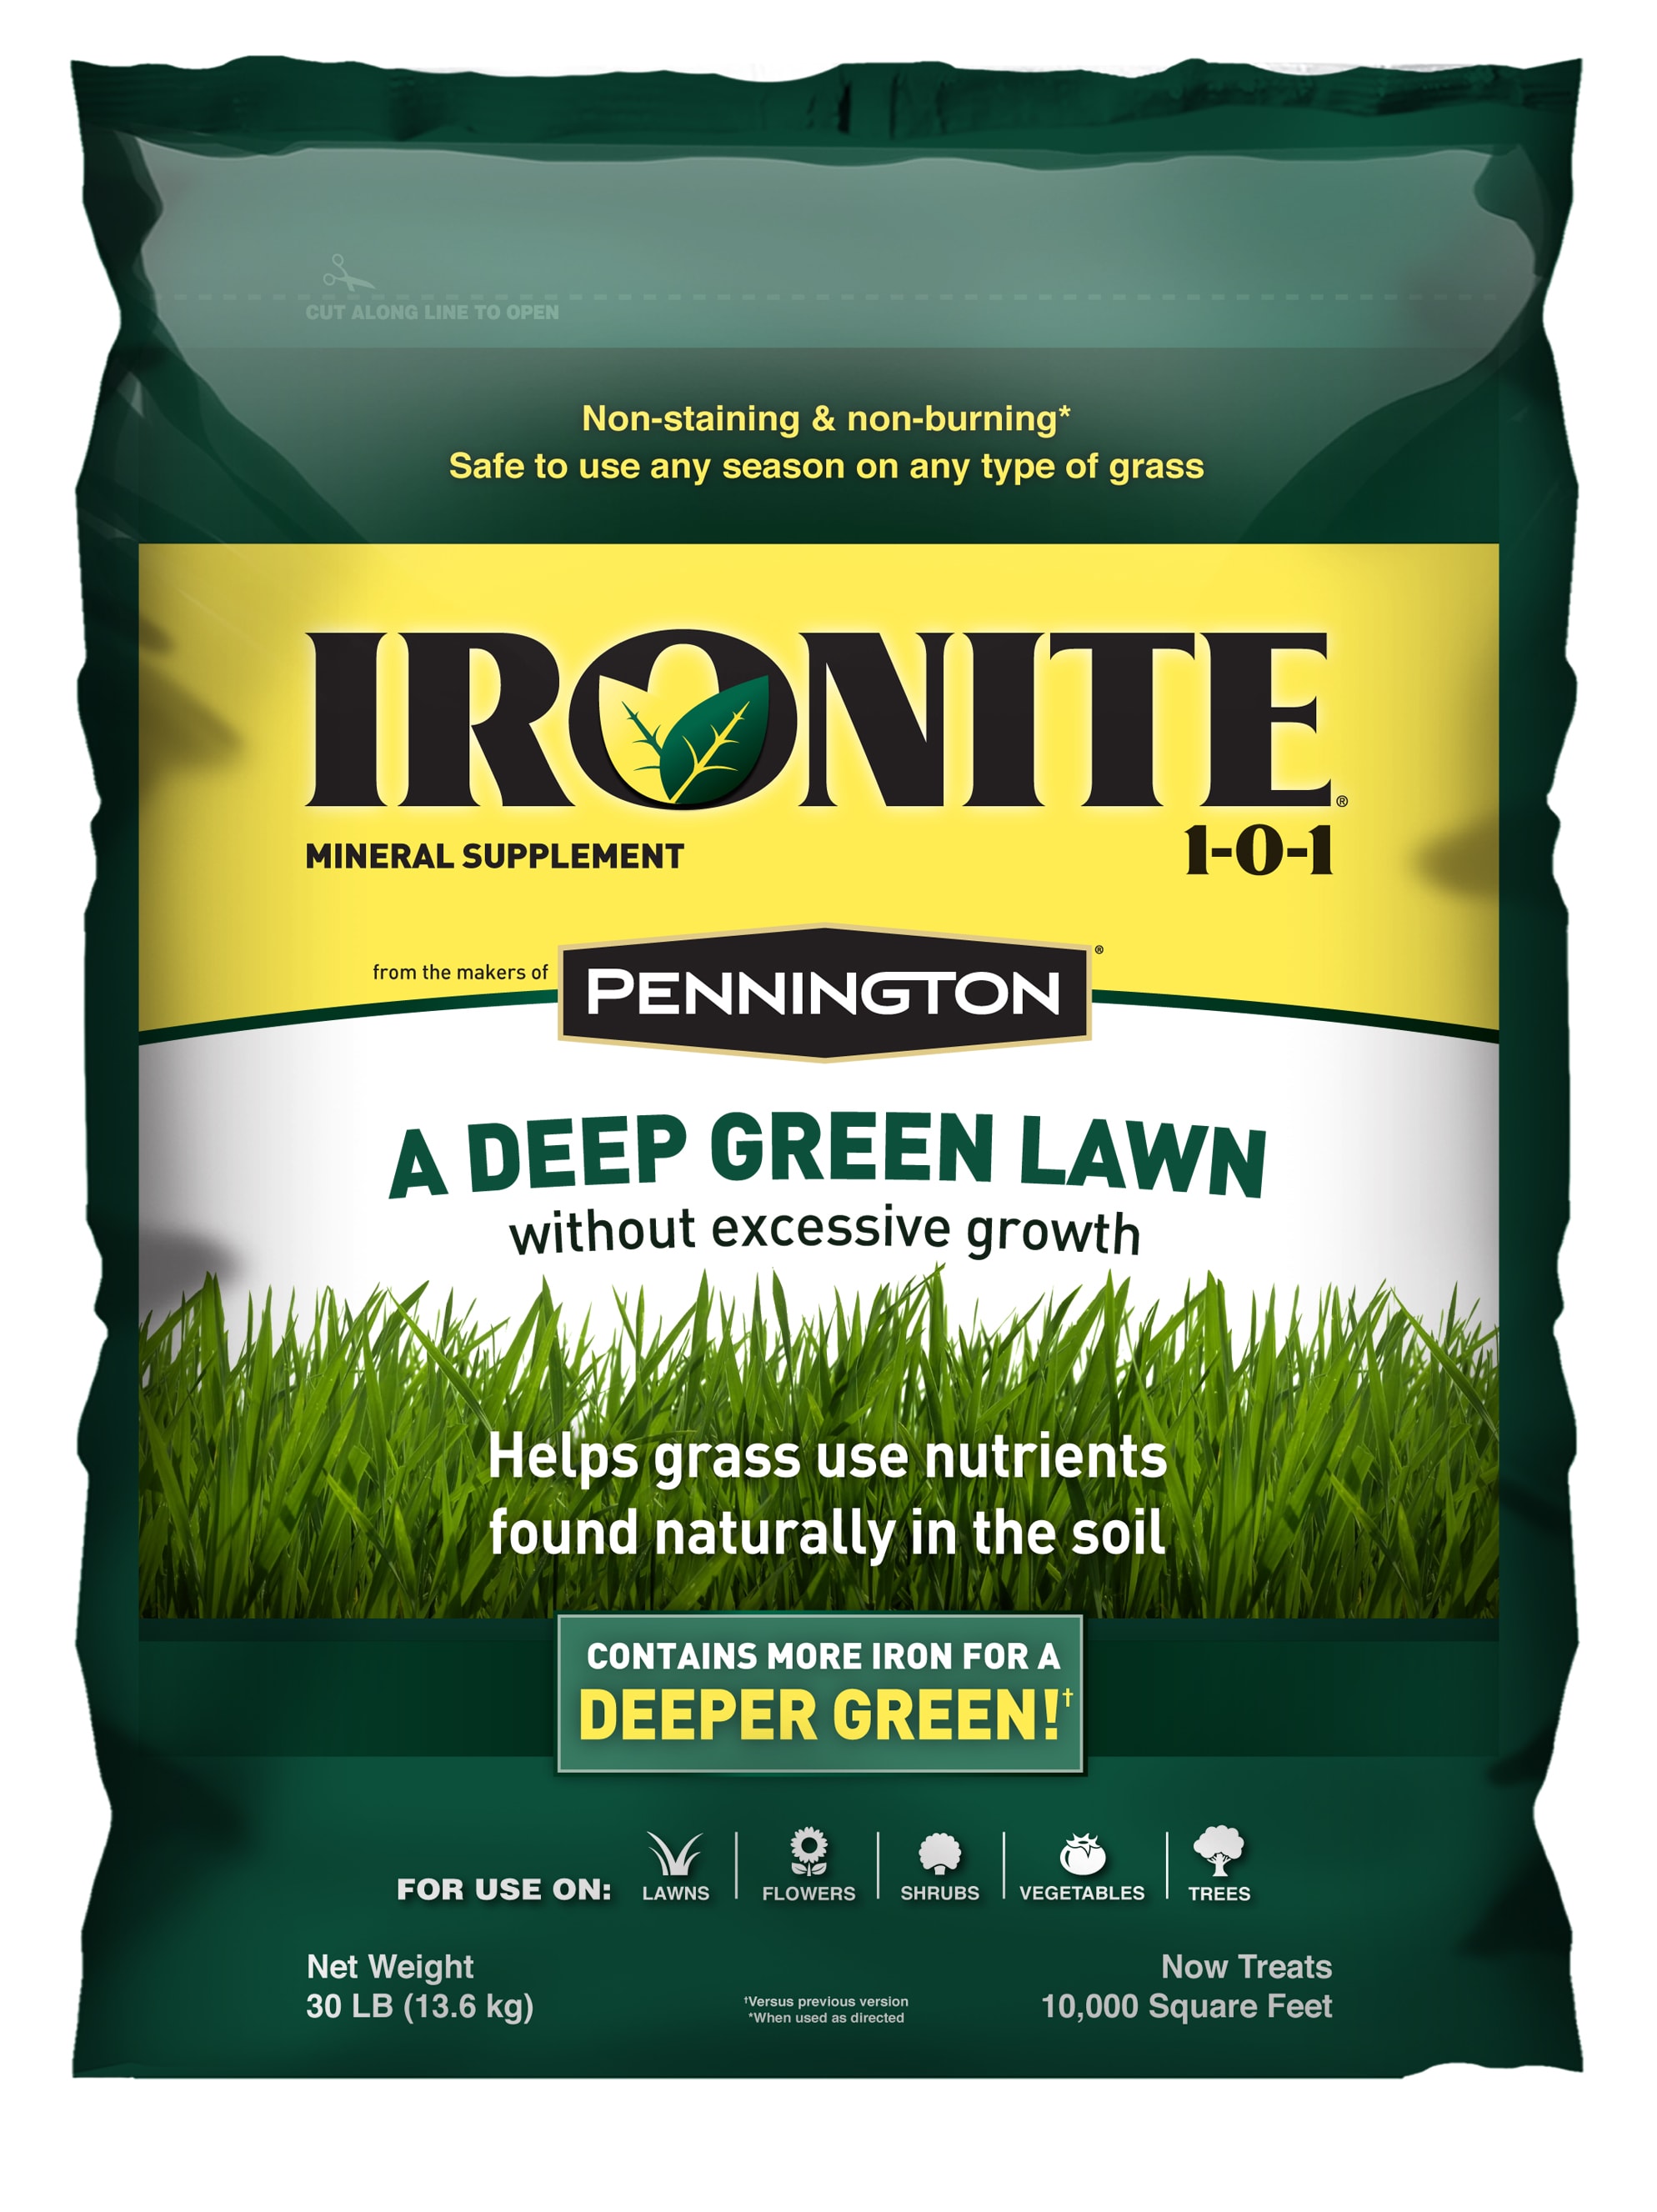 Image of Ironite lawn fertilizer for lawns